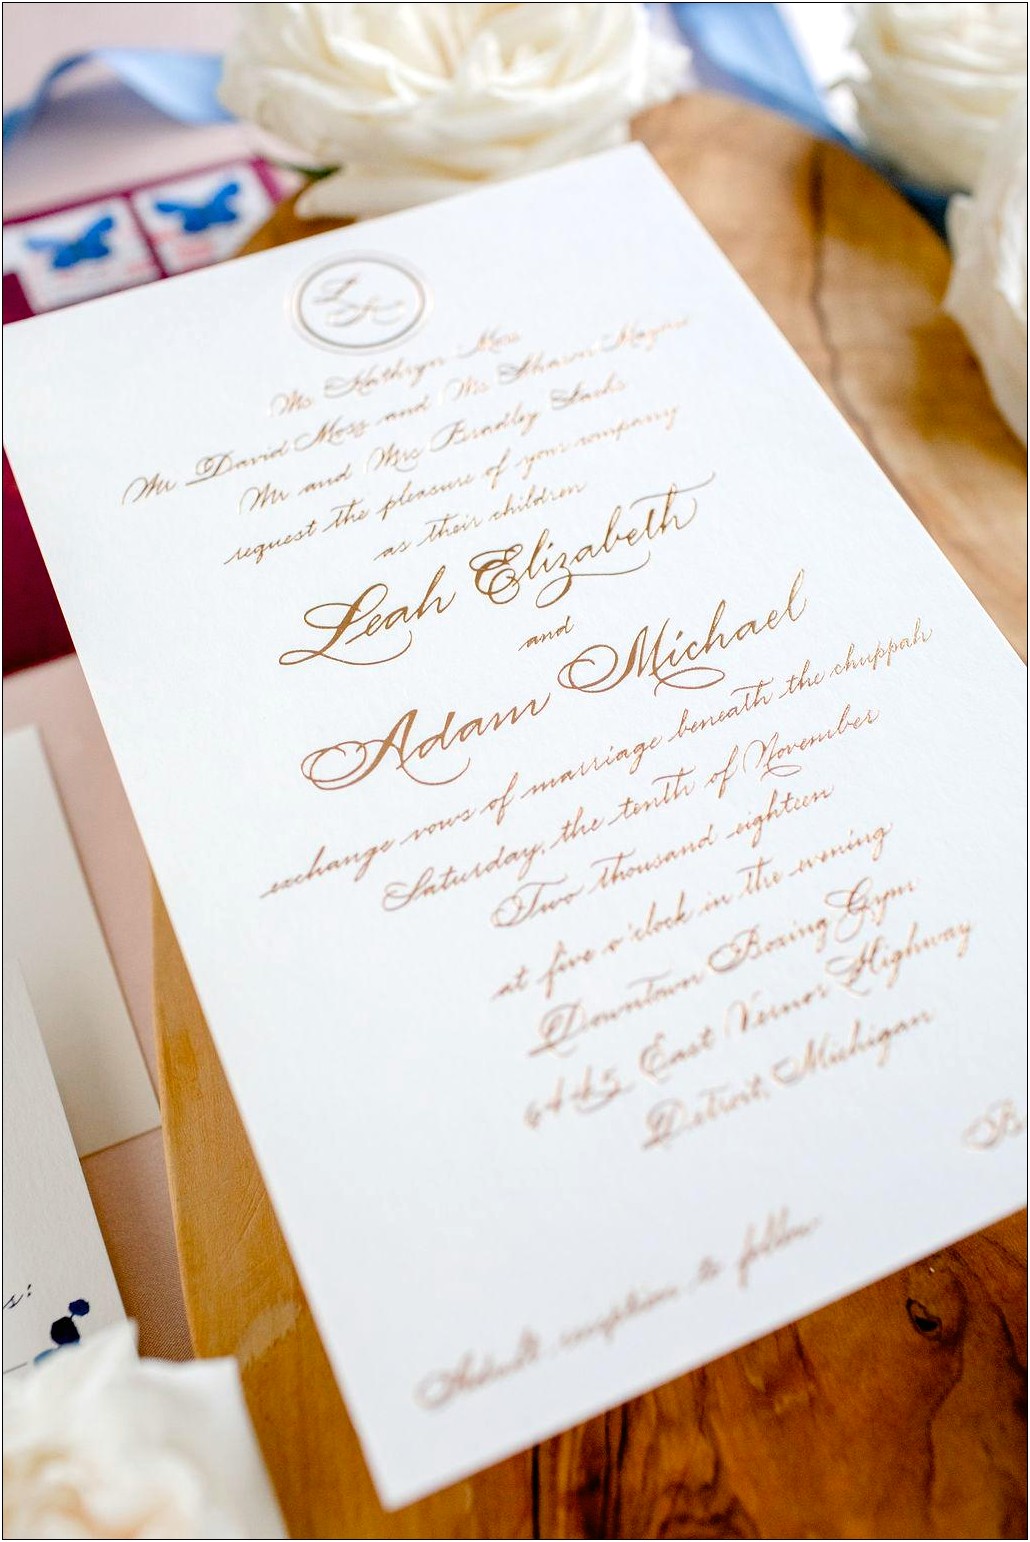 Invite To Wedding Ceremony Or Only Reception